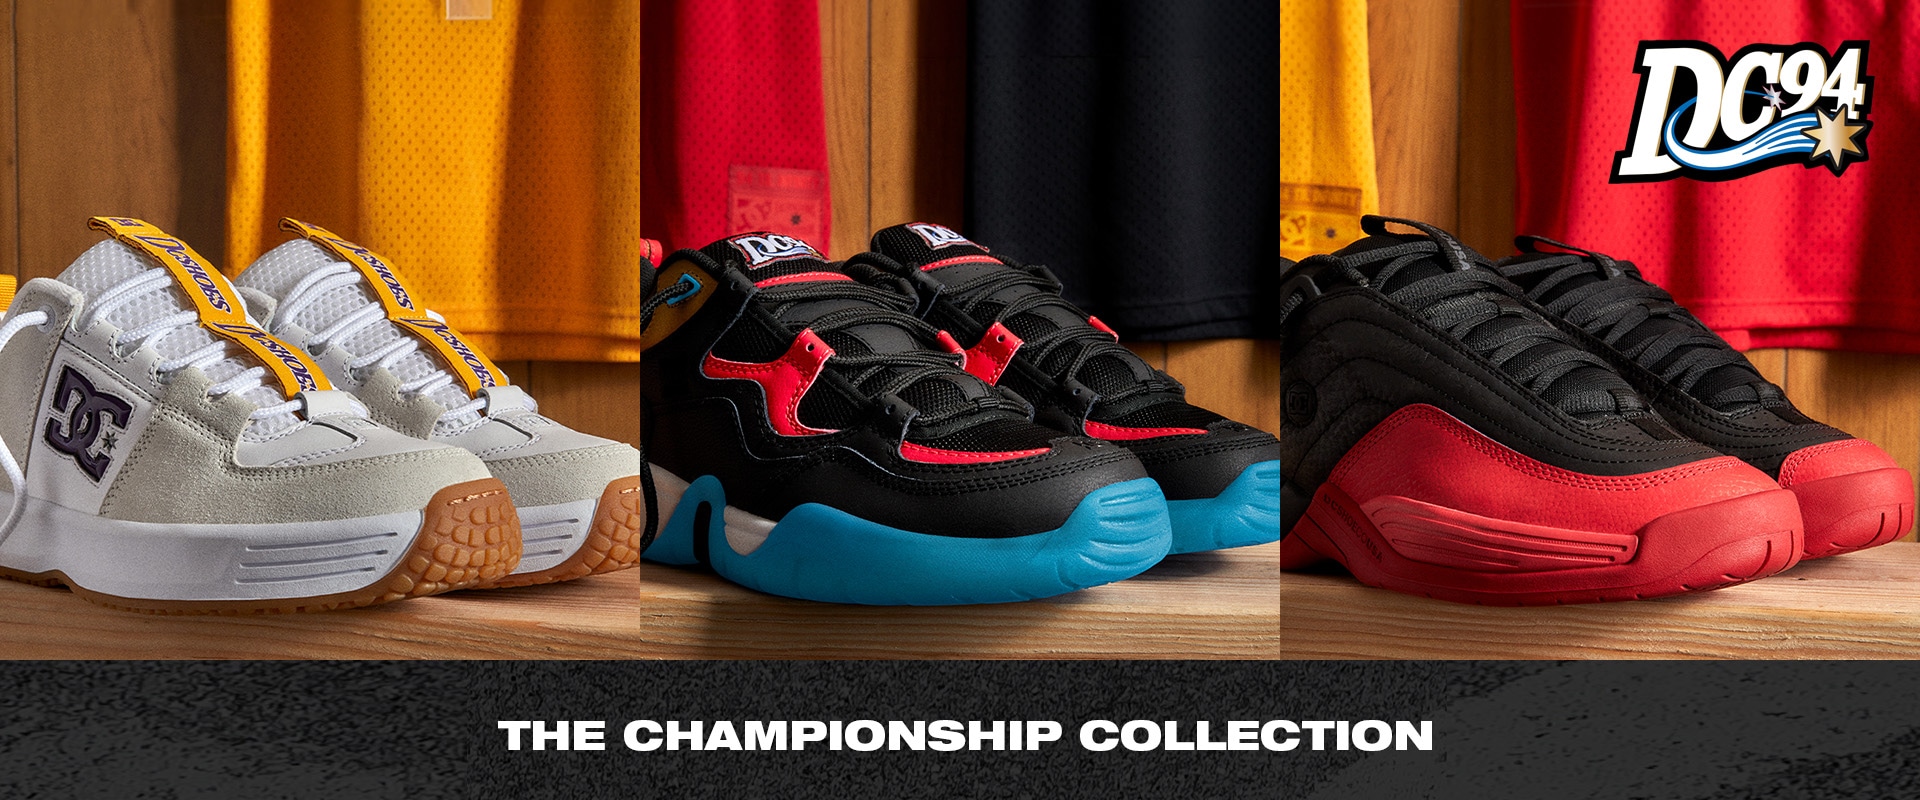 DC SHOE｜THE CHAMPIONSHIP COLLECTION